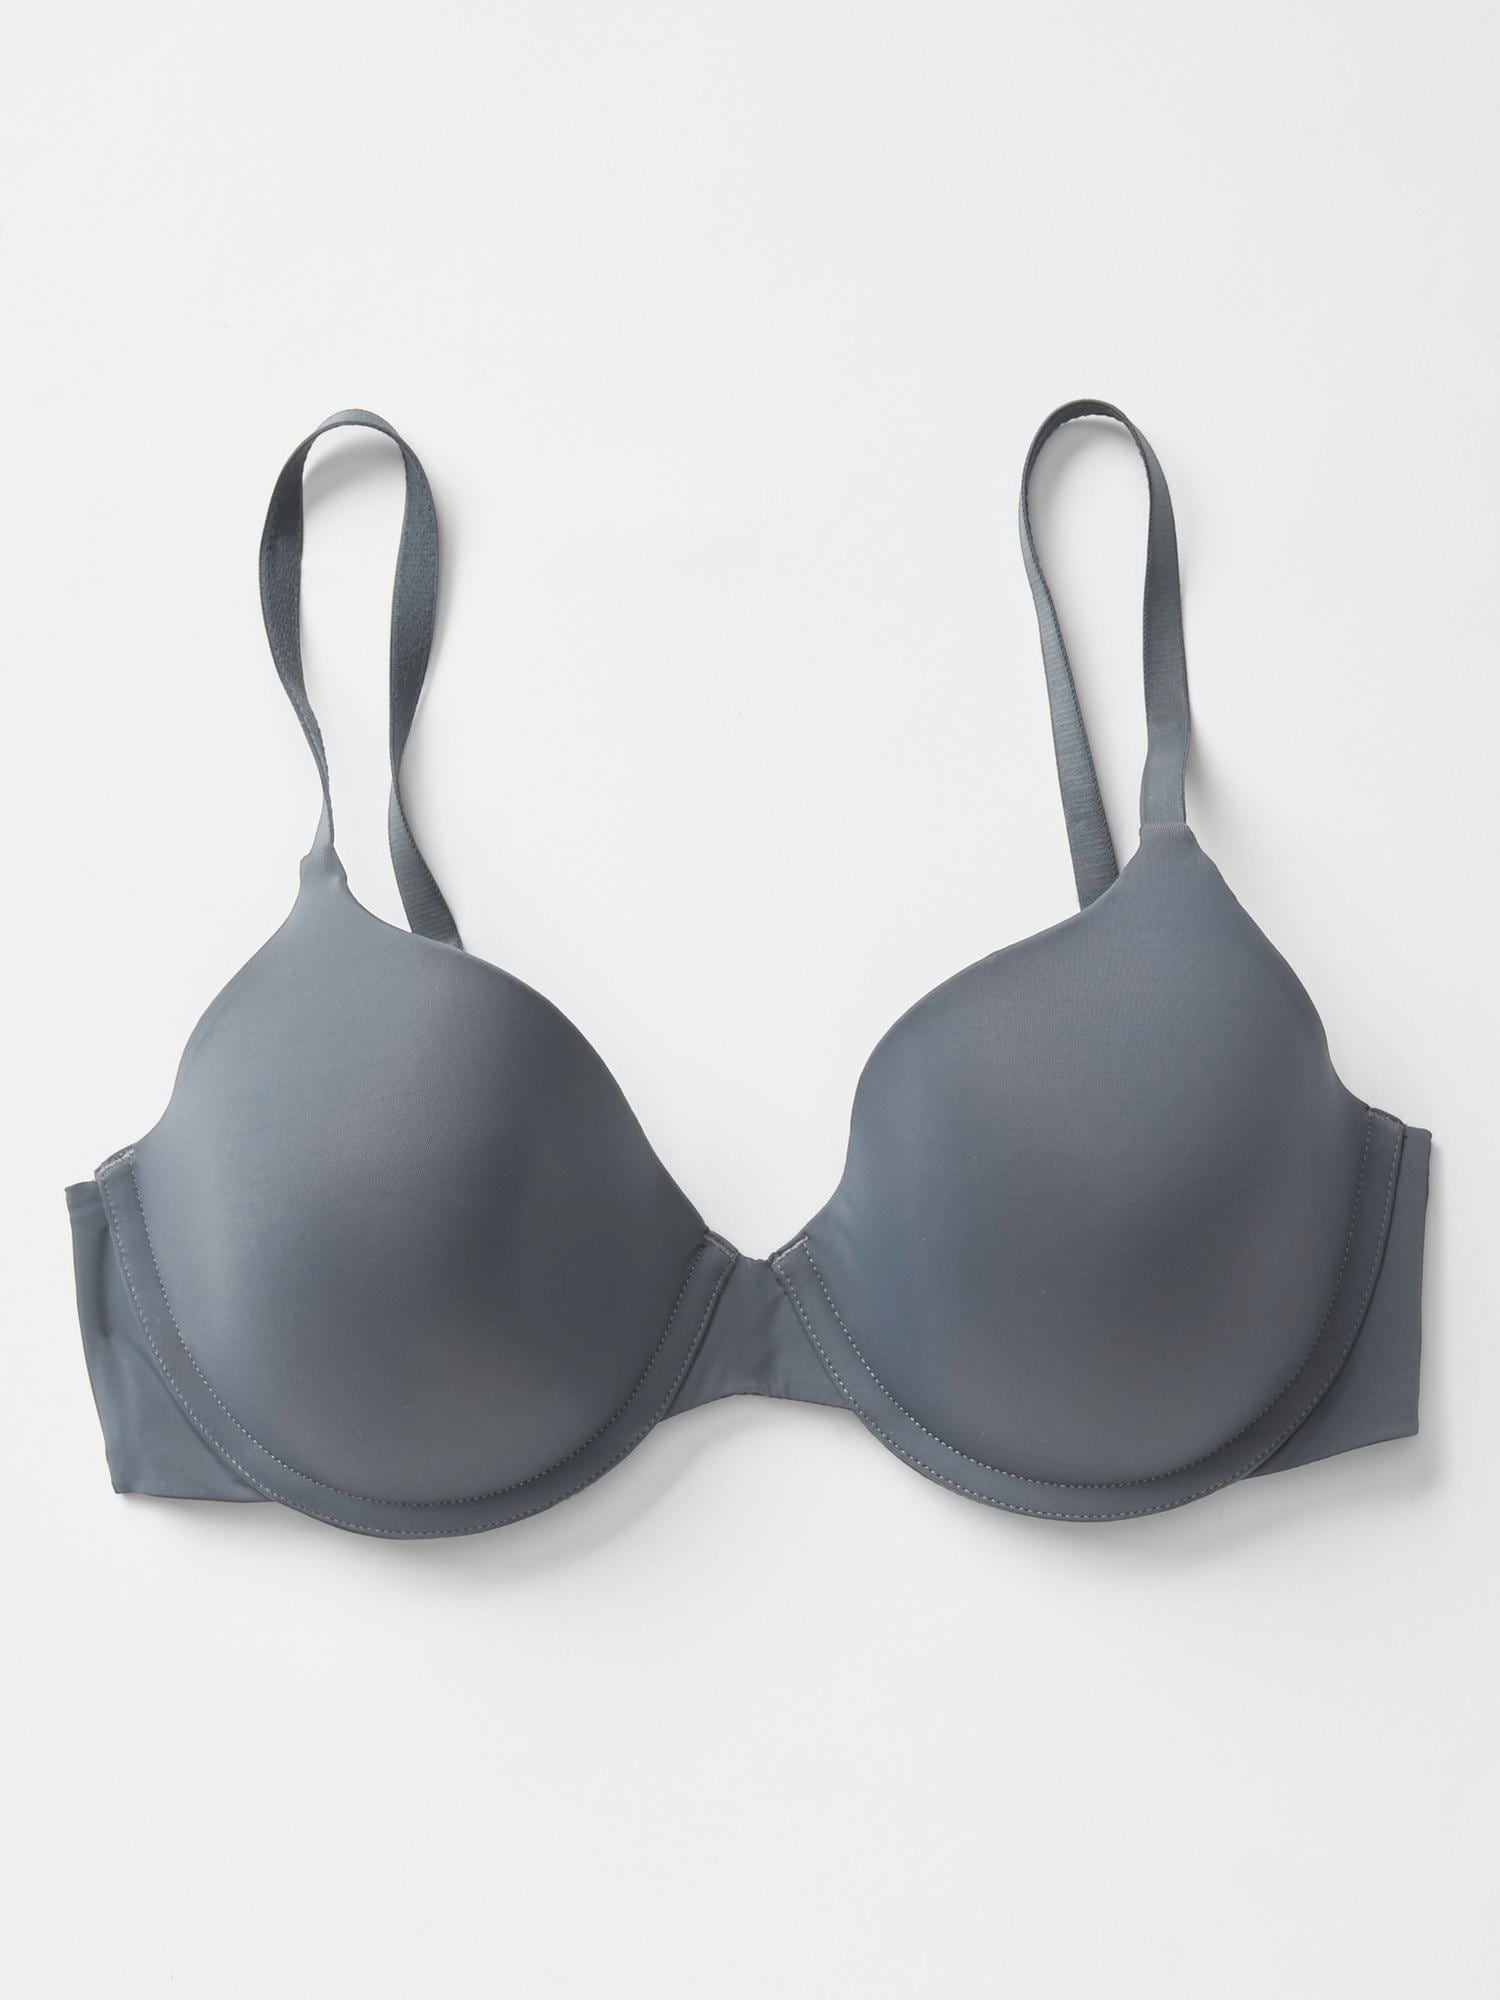 Gap Body T-Shirt Bra 34C  Comfortable and Supportive